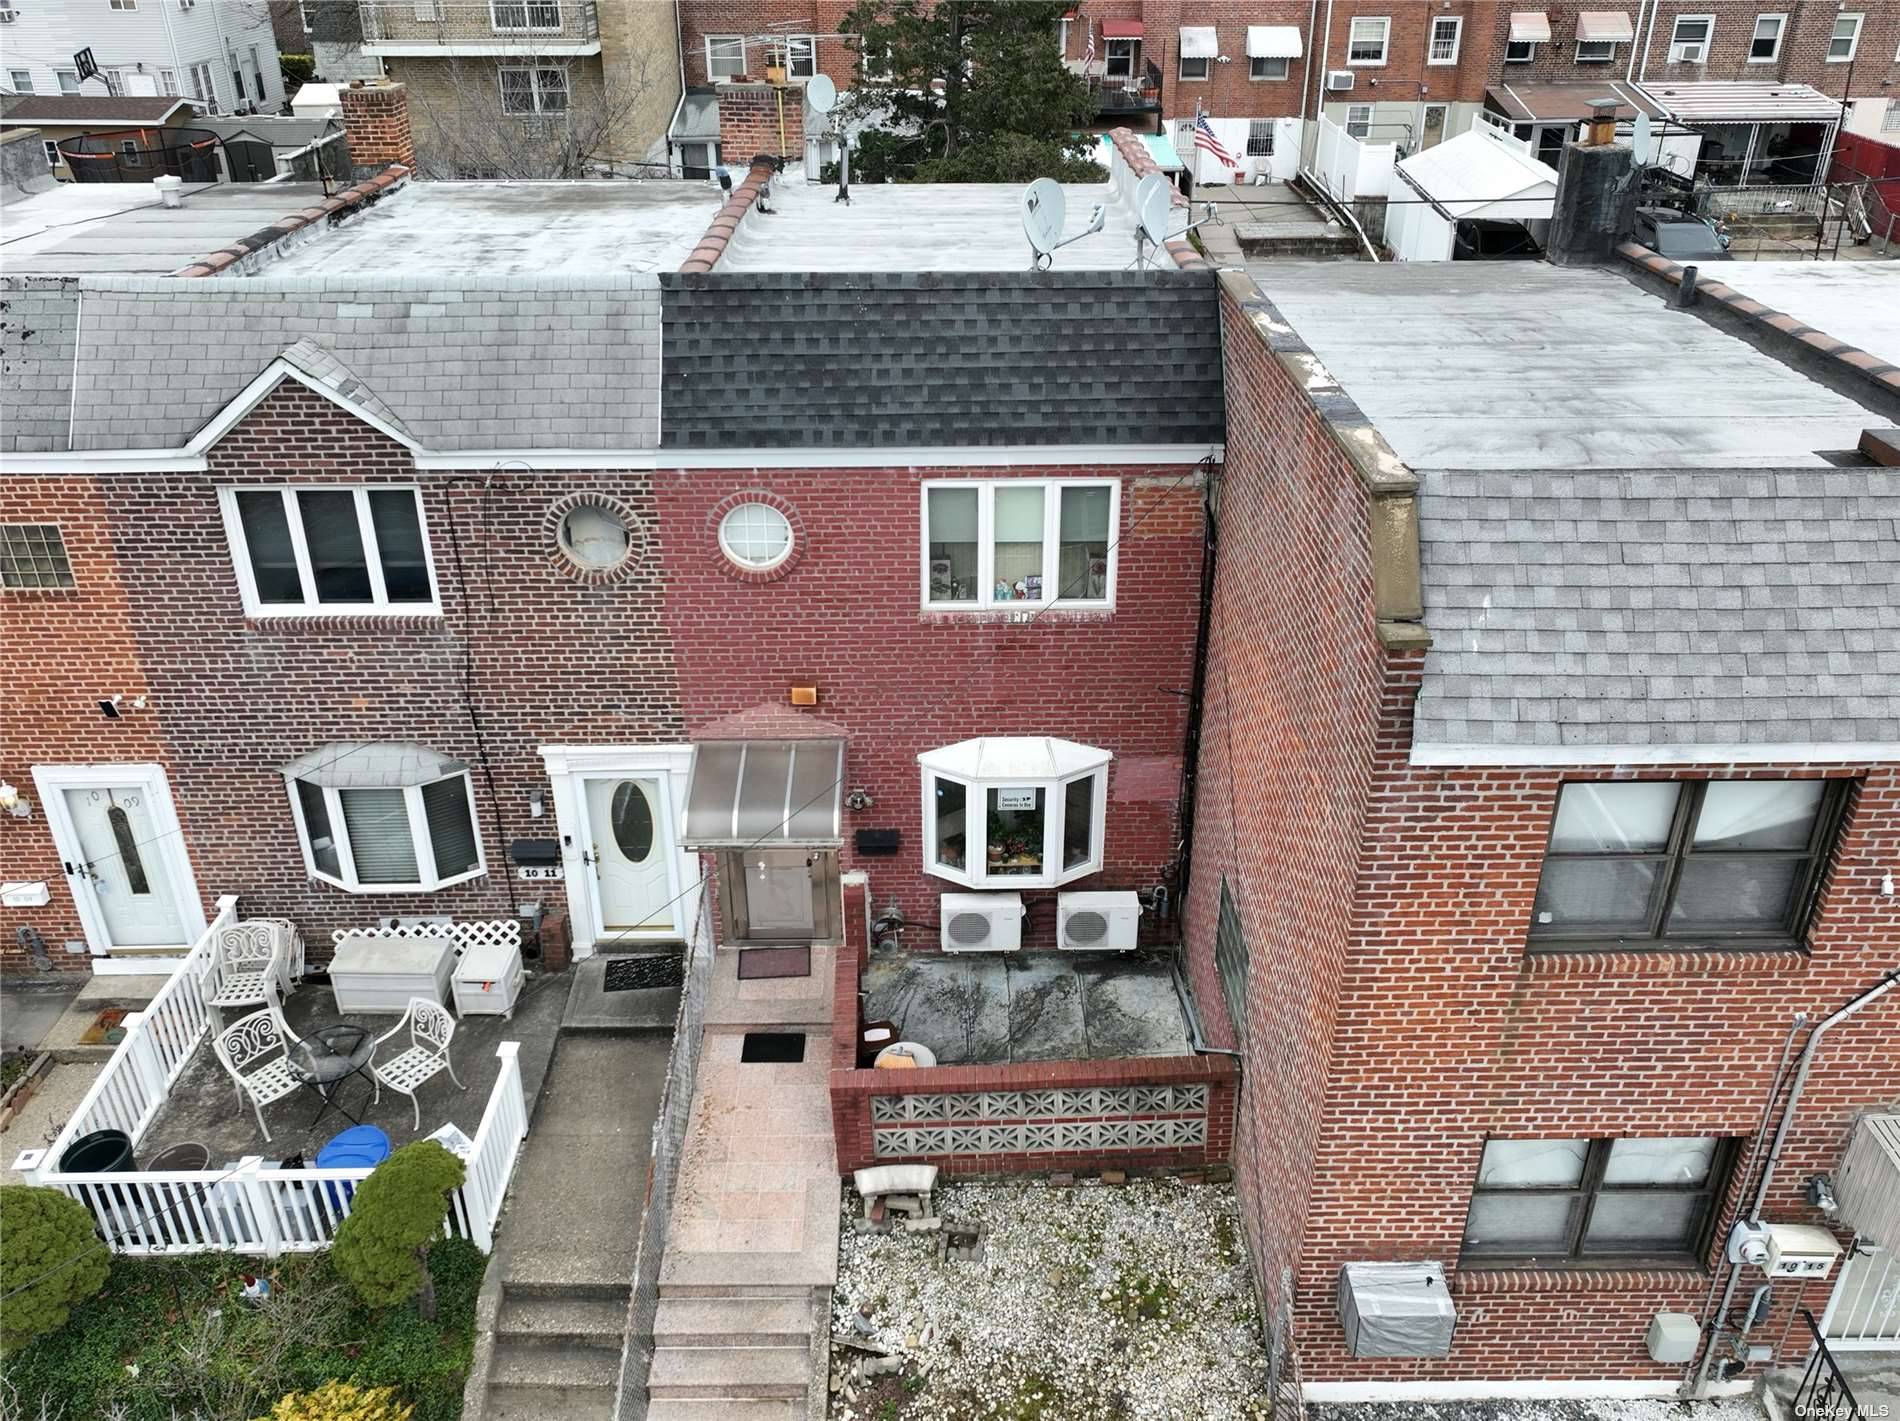 A very good condition solid brick townhouse in College Point ; It features one large living room, one kitchen, and a dining room on the first floor.